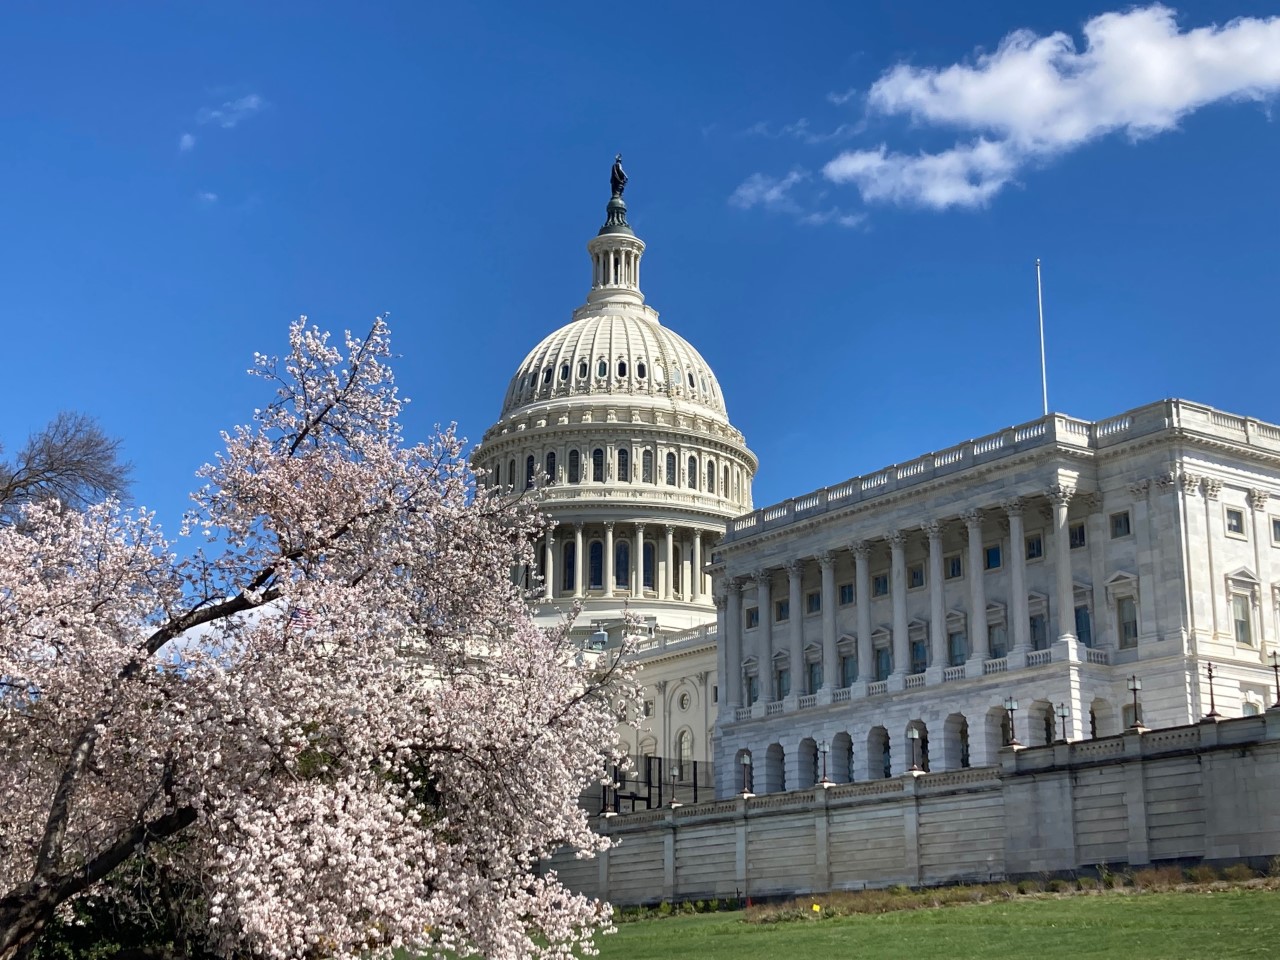 D.C.’s Cherry Blossoms Illustrate The Beauty And Fragility Of Spring